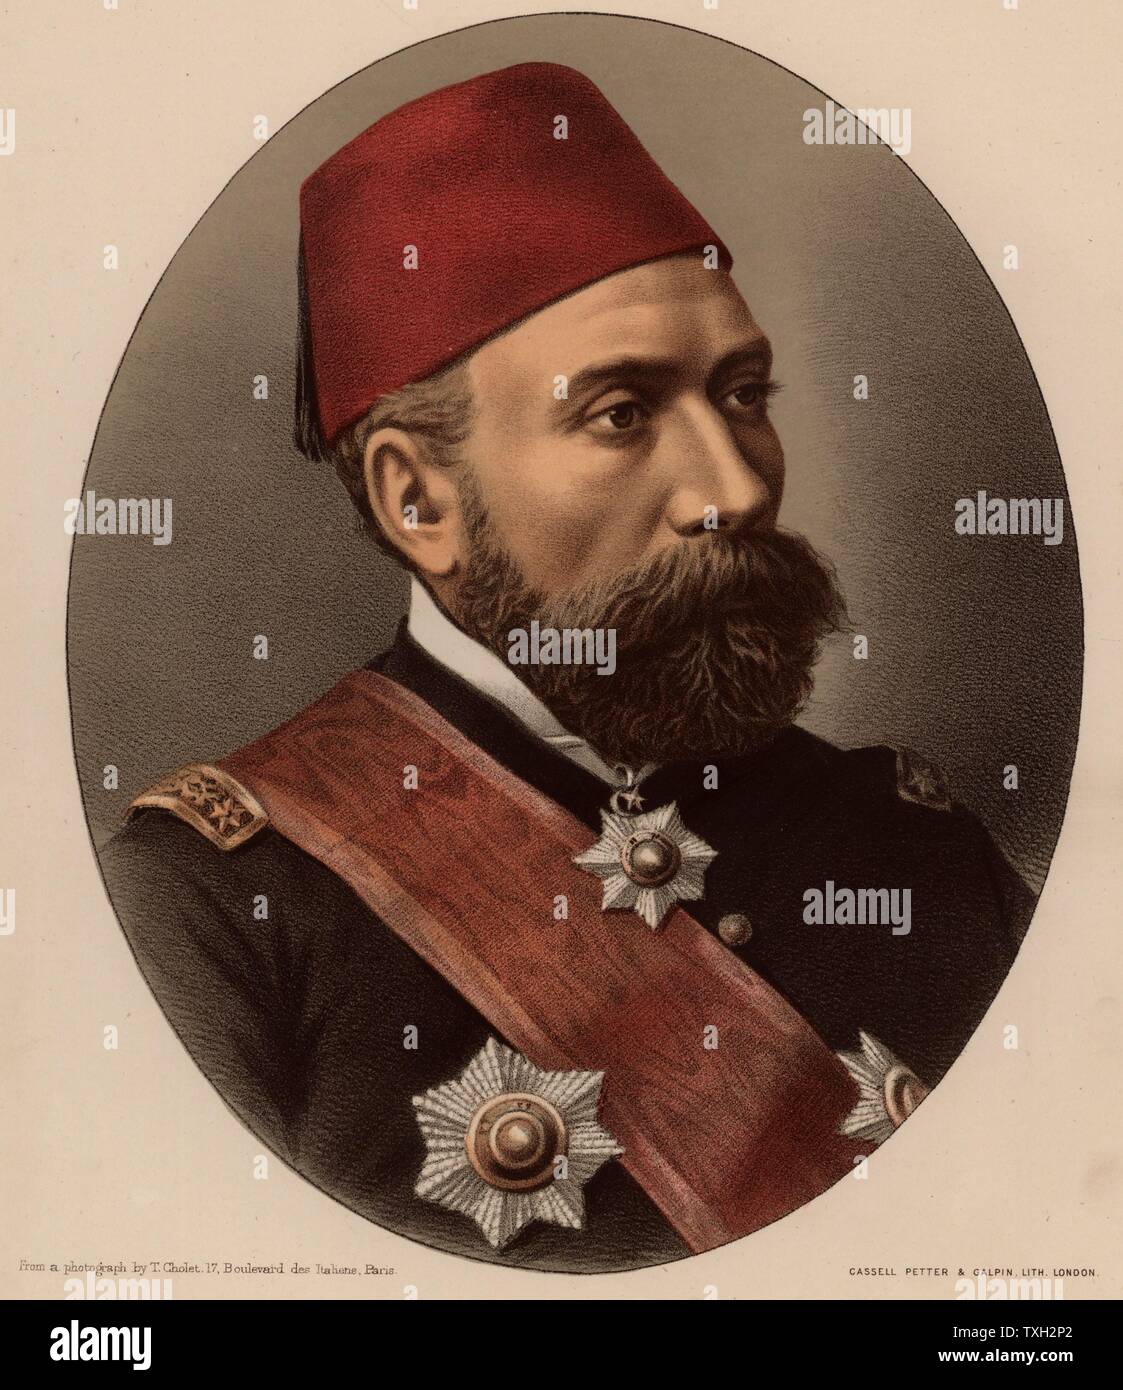 Osman Nuri Pasha (1837?-1900) General of the Ottoman Empire.  Fought in the Crimean War (1854-1856).  Created Field Marshal in the Russo-Turkish War (1877-1878). From 'The Modern Portrait Gallery' (London, c1880). Tinted lithograph. Stock Photo